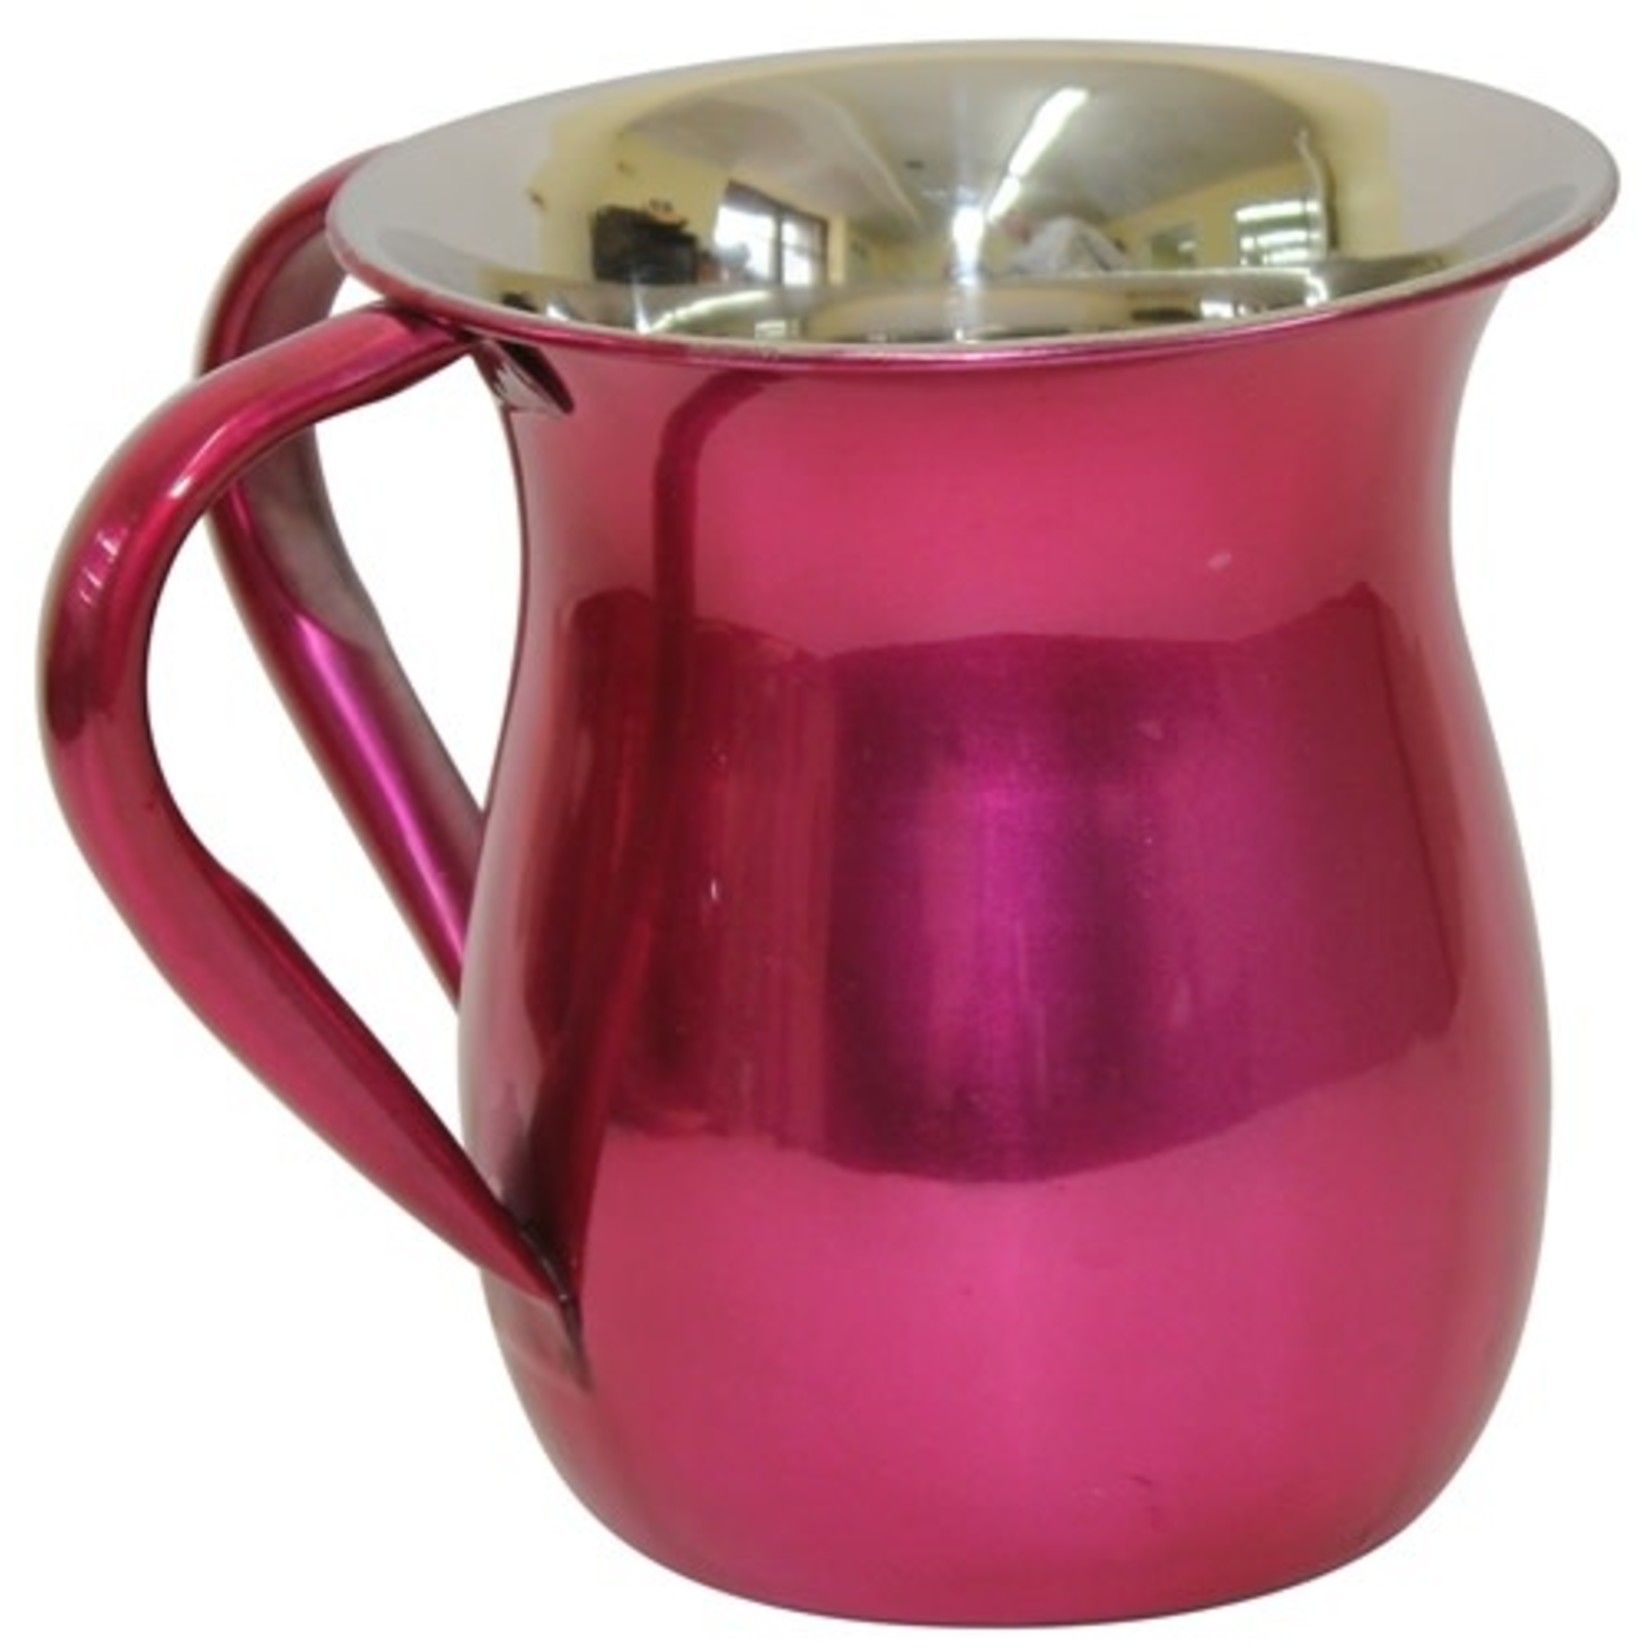 Washing Cup, Stainless Steel